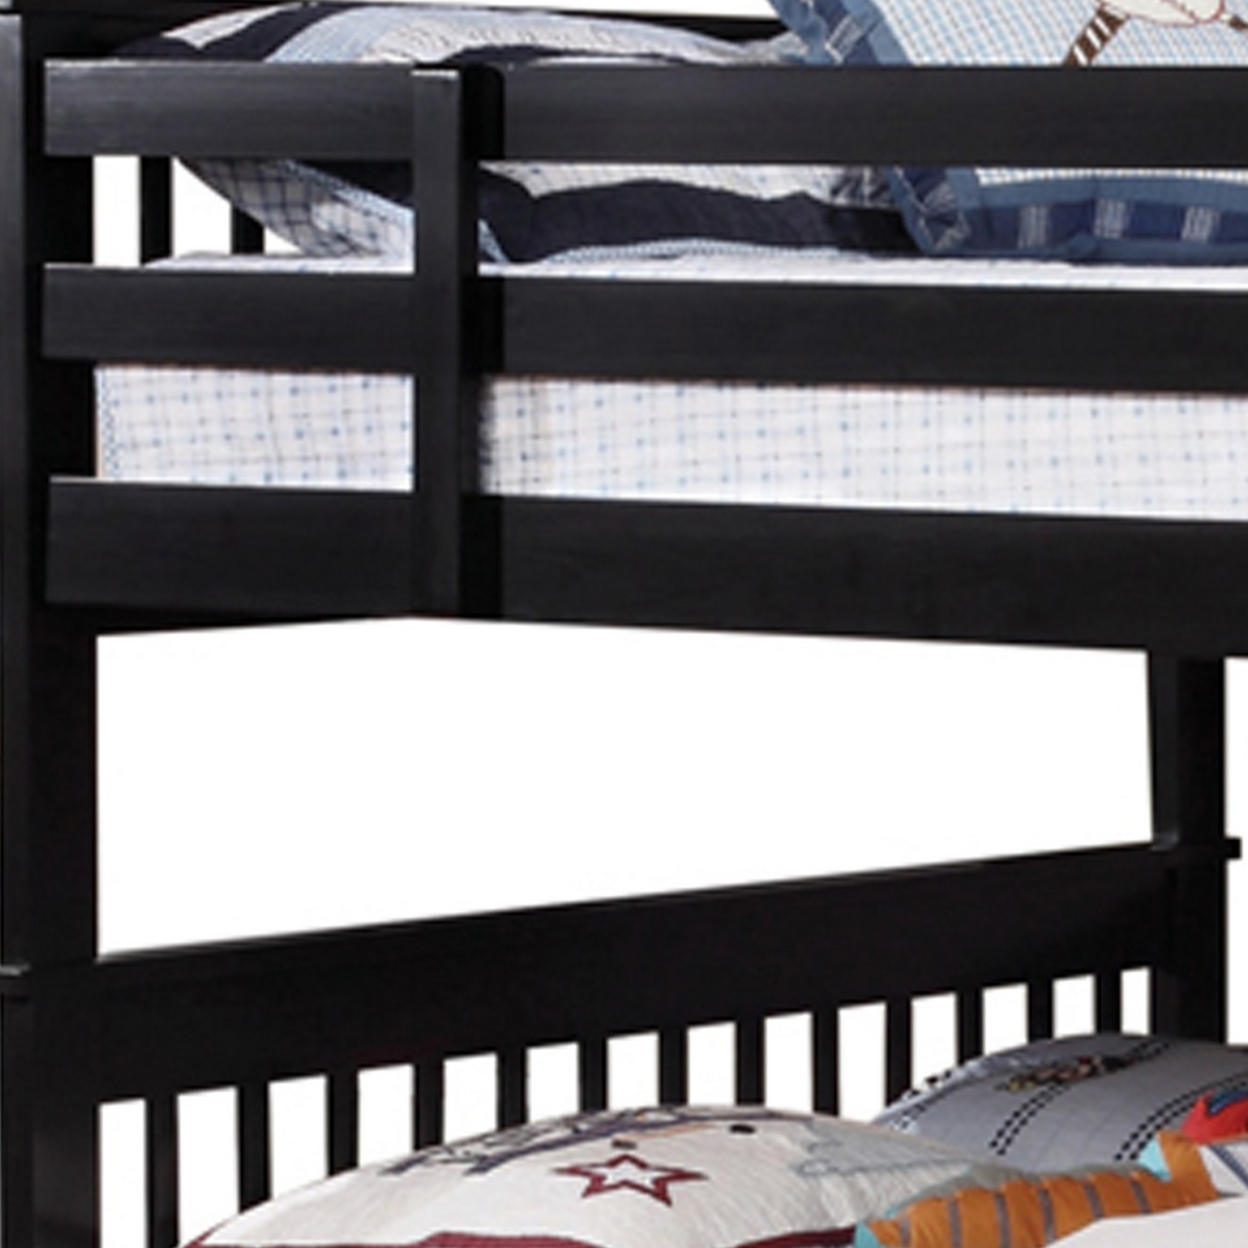 Mission Style Full Over Full Bunk Bed With Attached Ladder, Black- Saltoro Sherpi